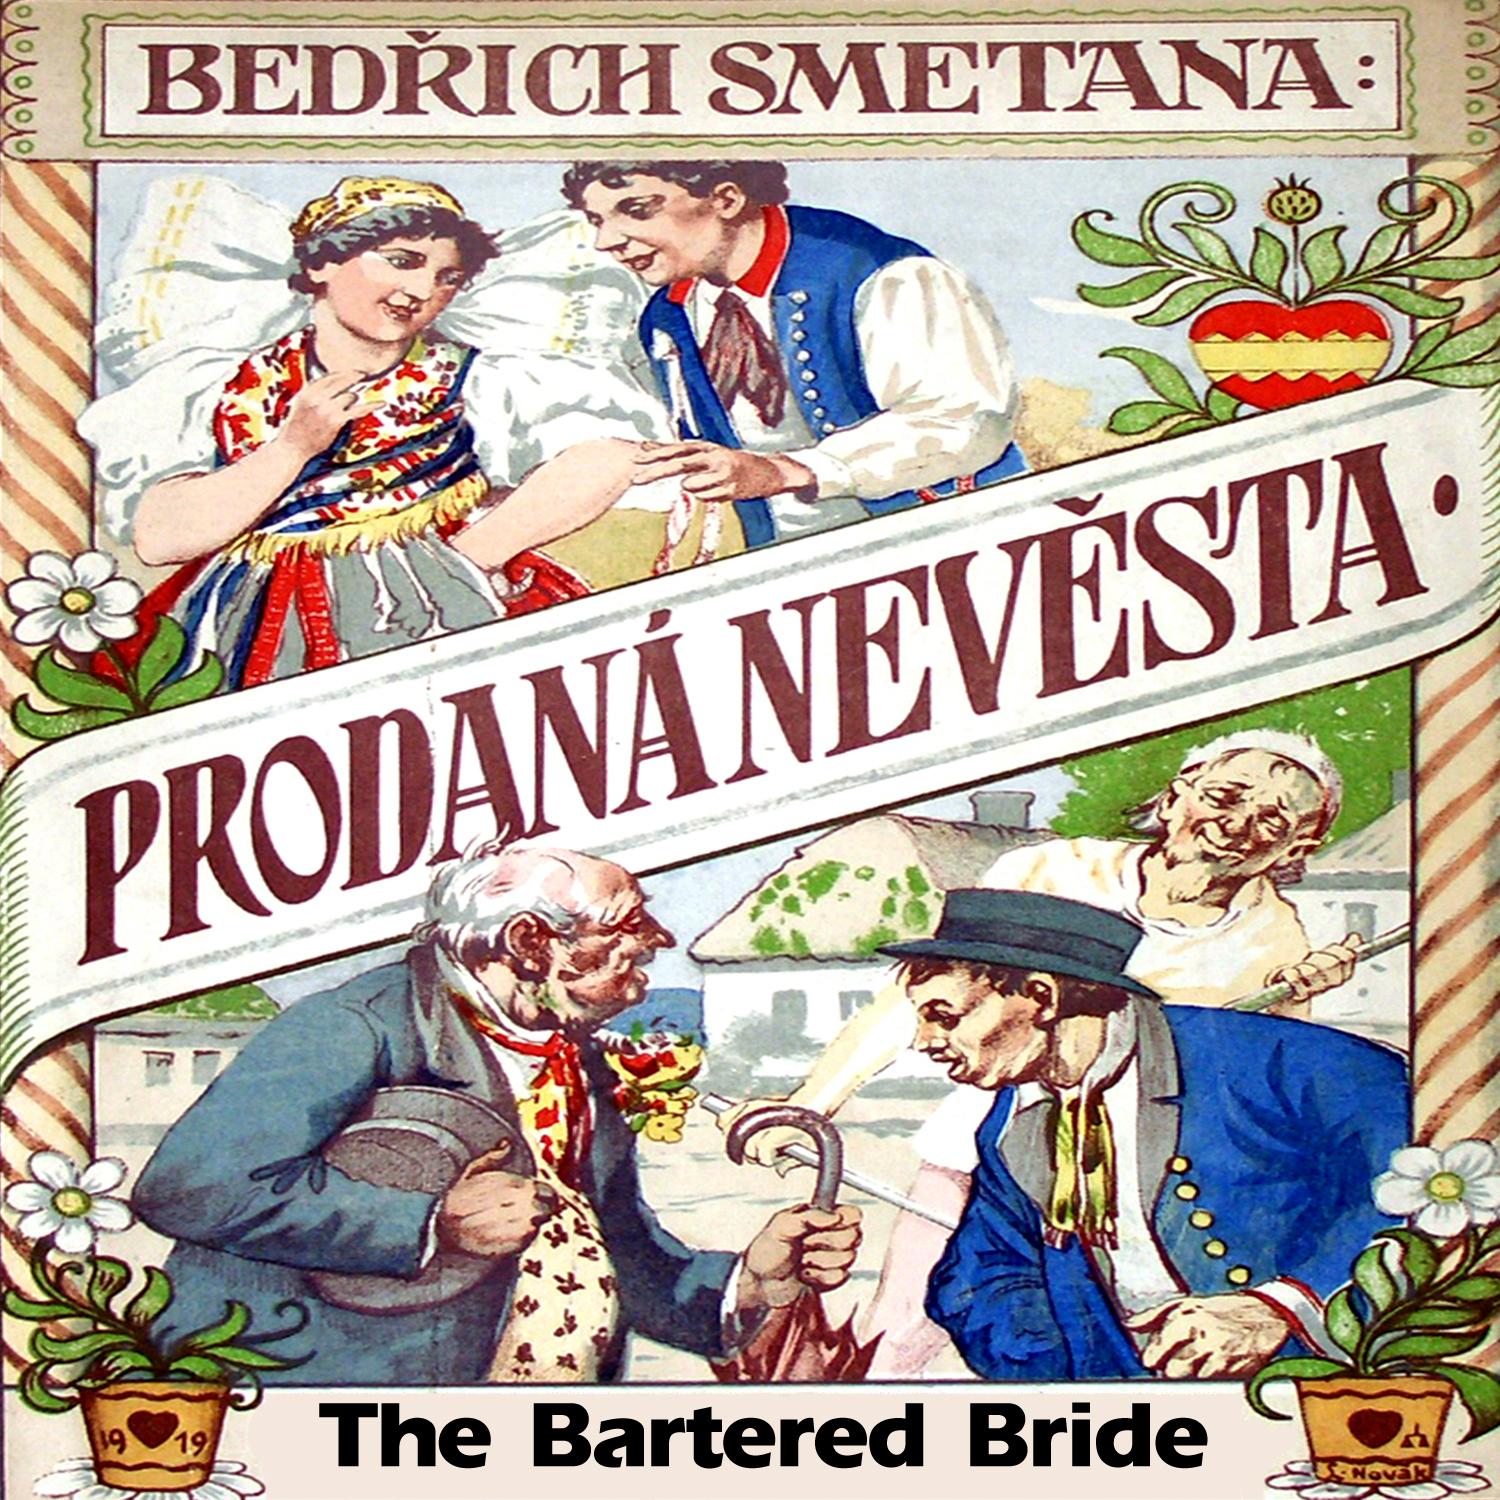 The Bartered Bride, Act II: Furiant